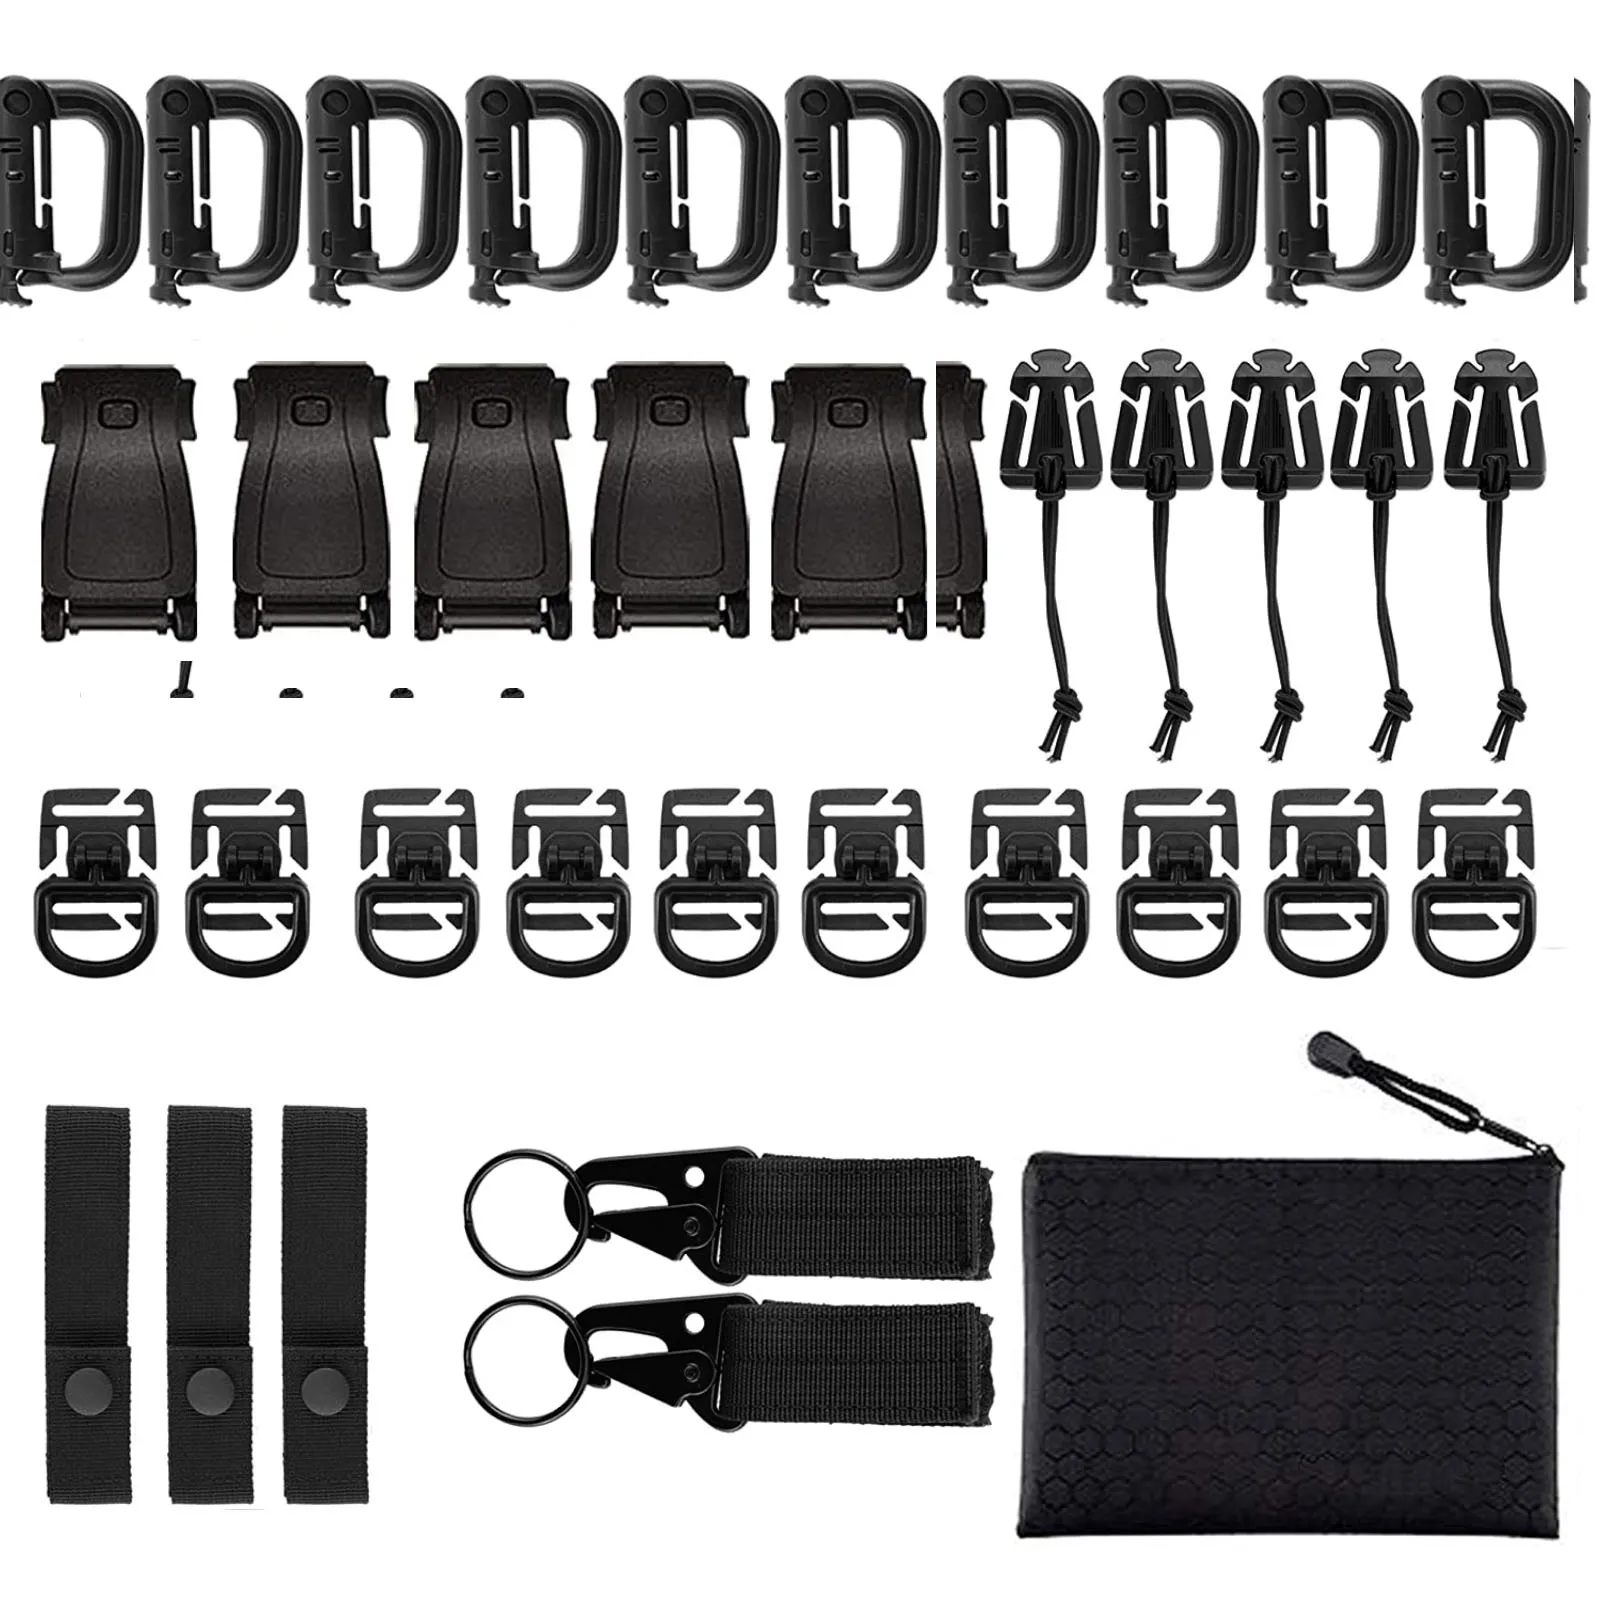 

Kit Of 35 Molle Attachments Set Multi-purpose Carabiner Clips Accessories Kit With Molle Pouch D-Ring Grimloc Locking Gear Clip